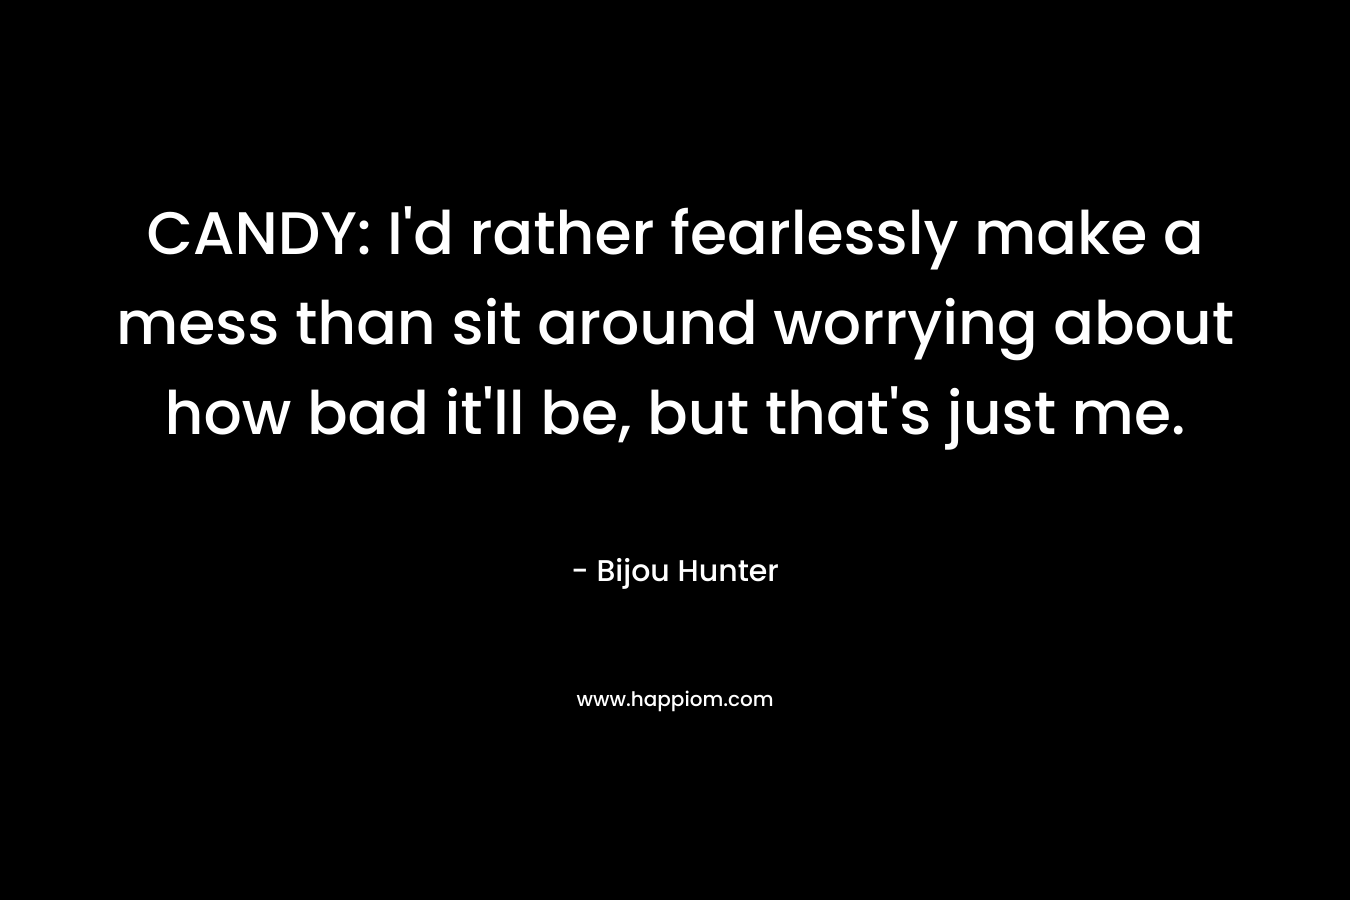 CANDY: I’d rather fearlessly make a mess than sit around worrying about how bad it’ll be, but that’s just me. – Bijou Hunter